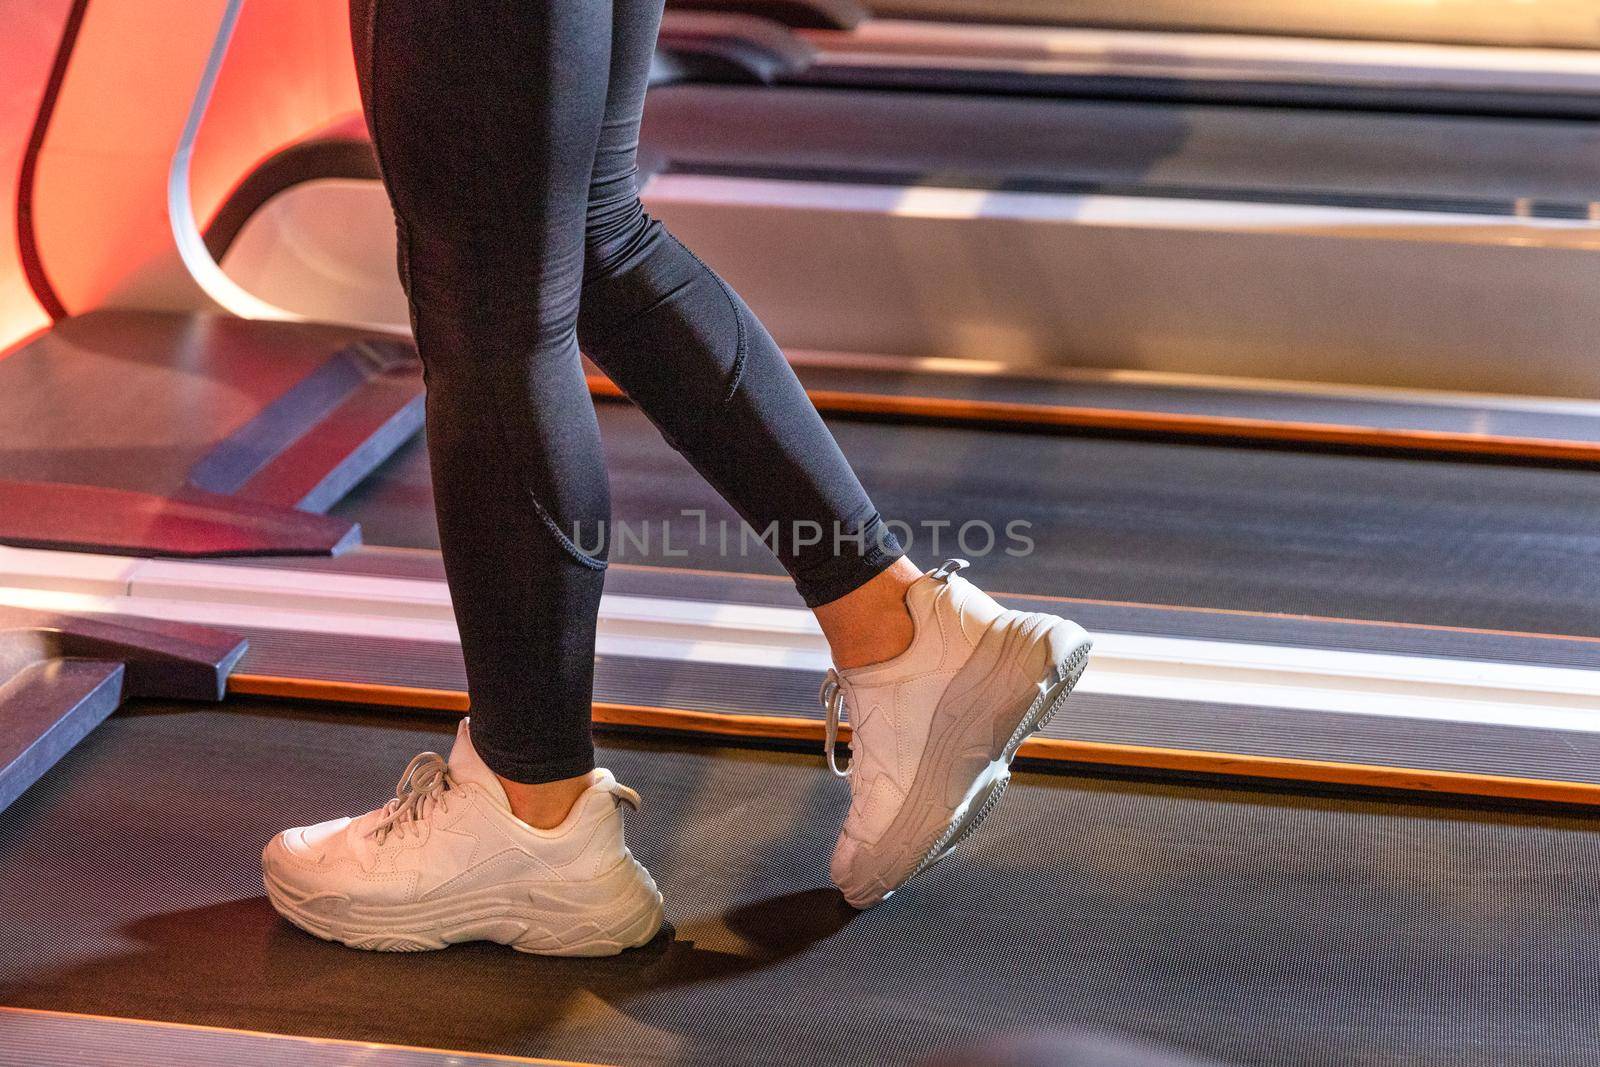 Fitness girl running on treadmill with white shoes